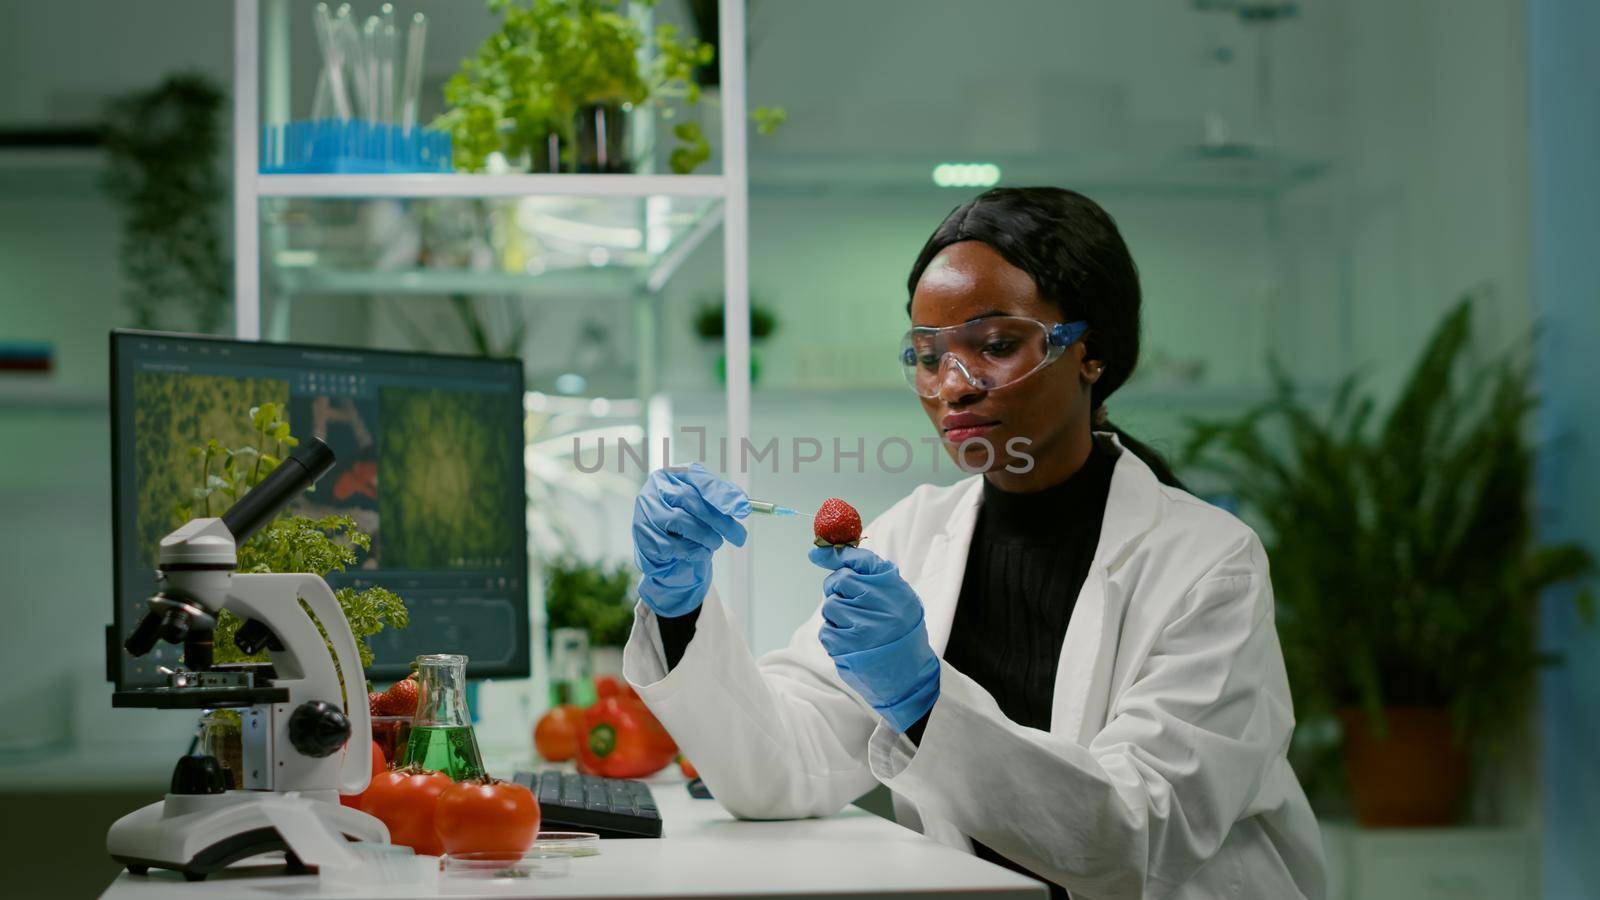 Chemist scientist injecting strawberry with organic liquid examining dna test by DCStudio